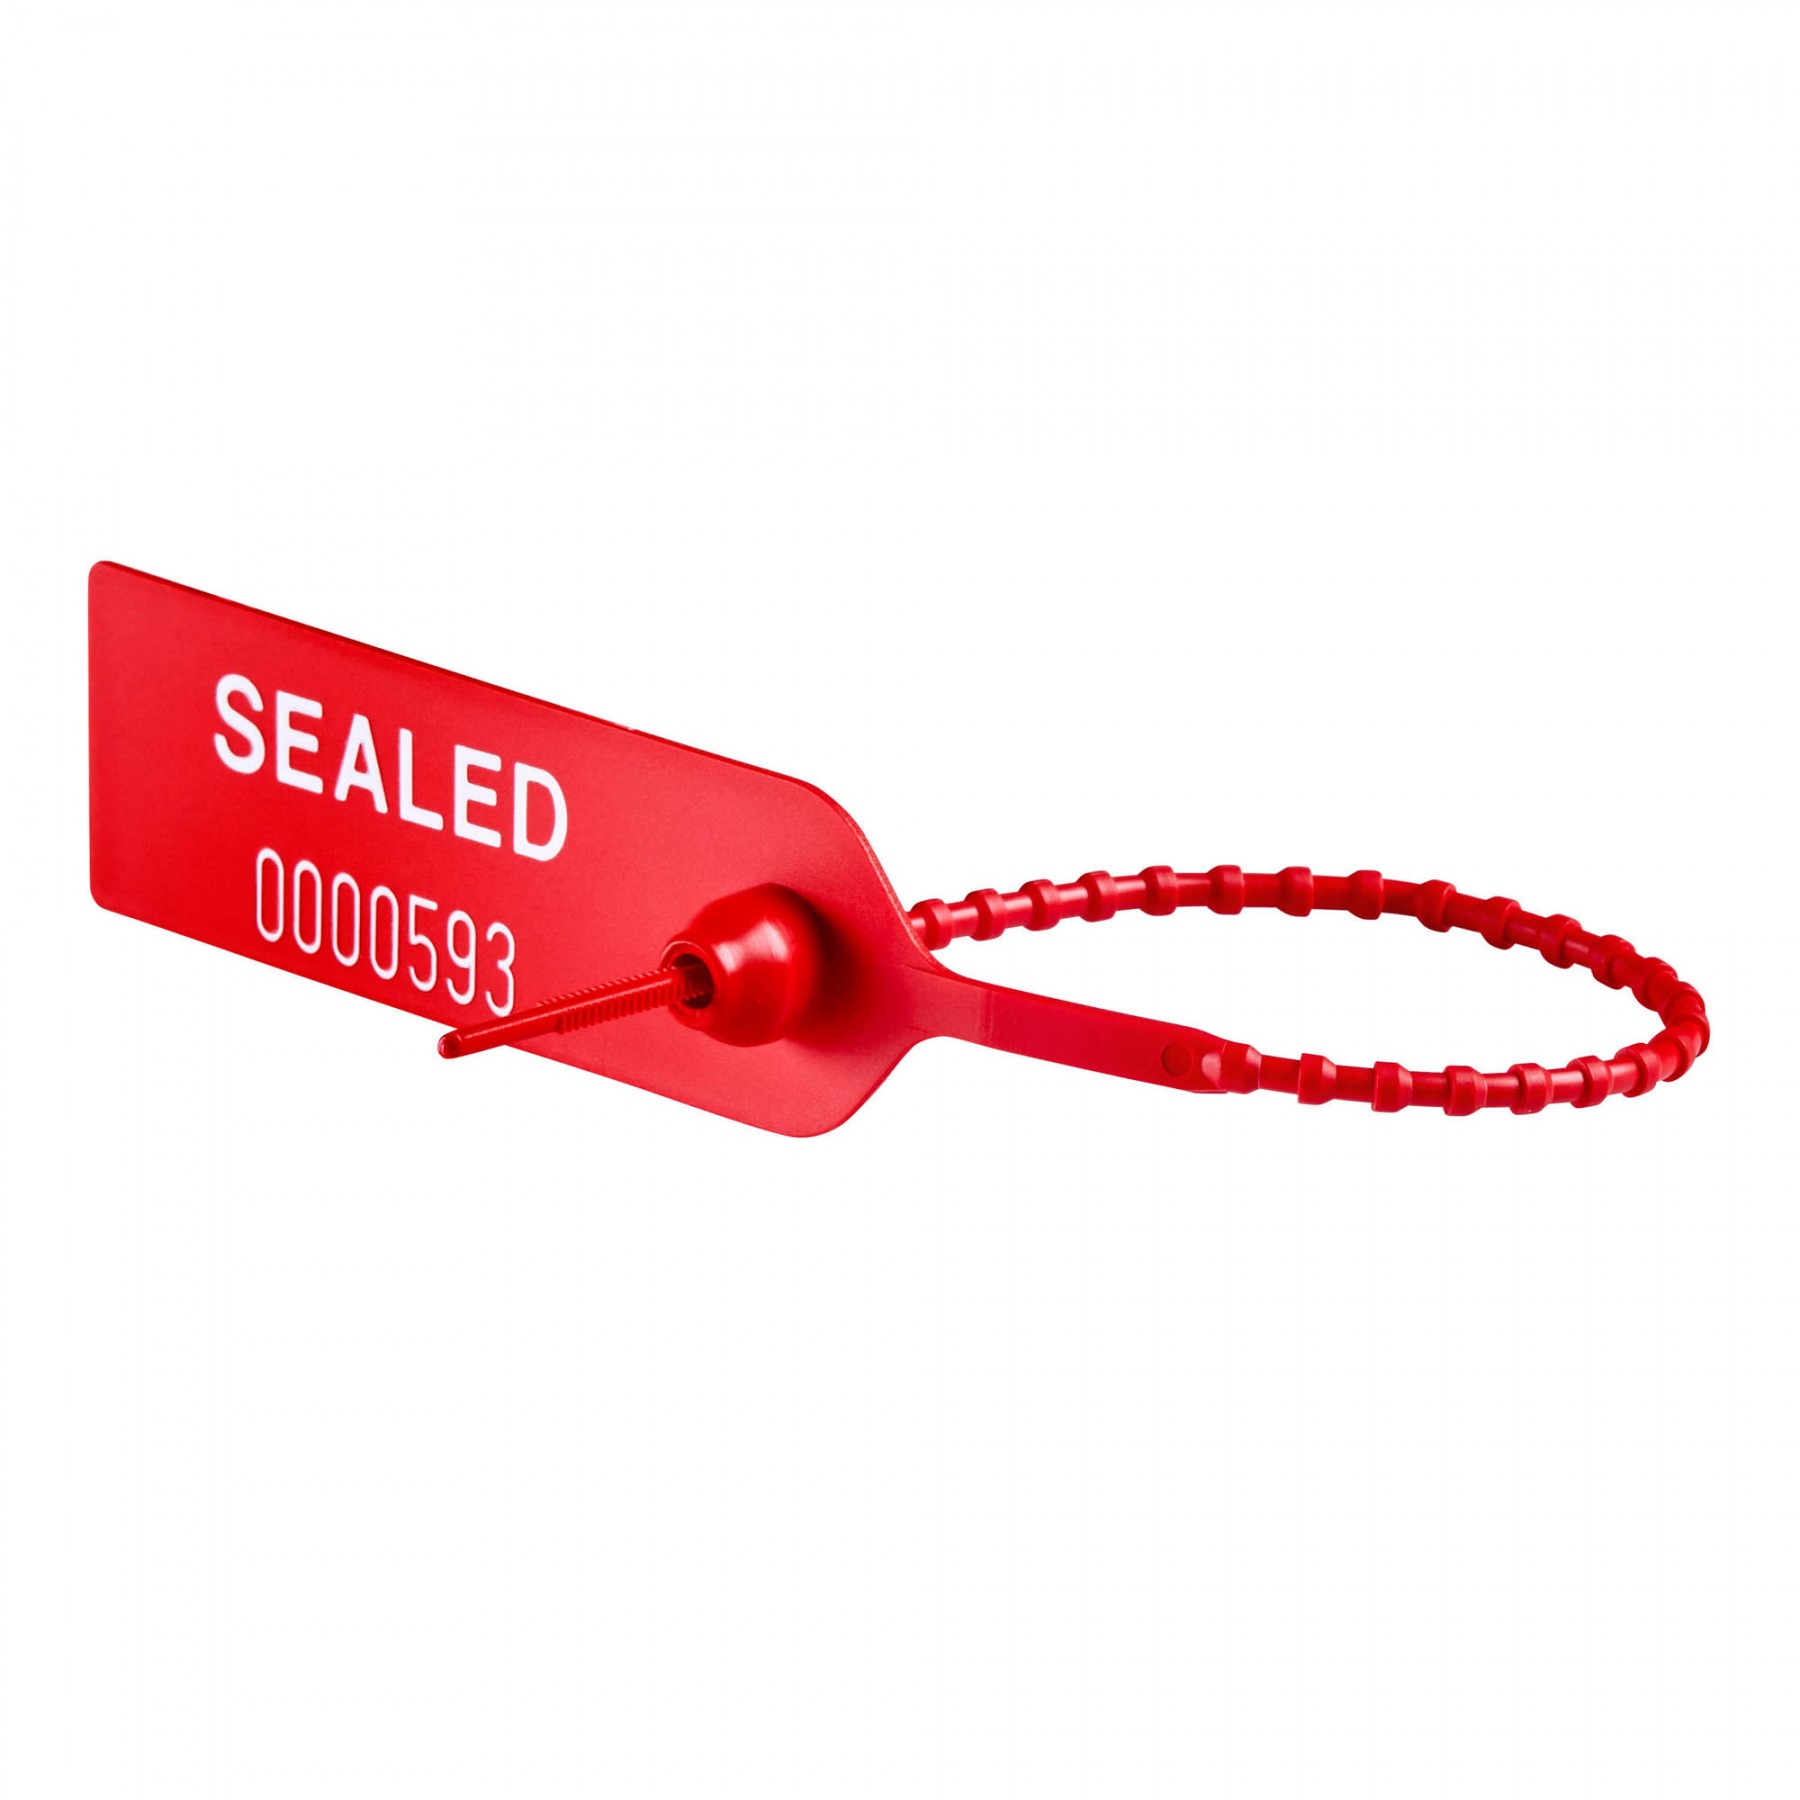 Truck Seals Red Plastic Pull Seals..(1000/Case) (each)..